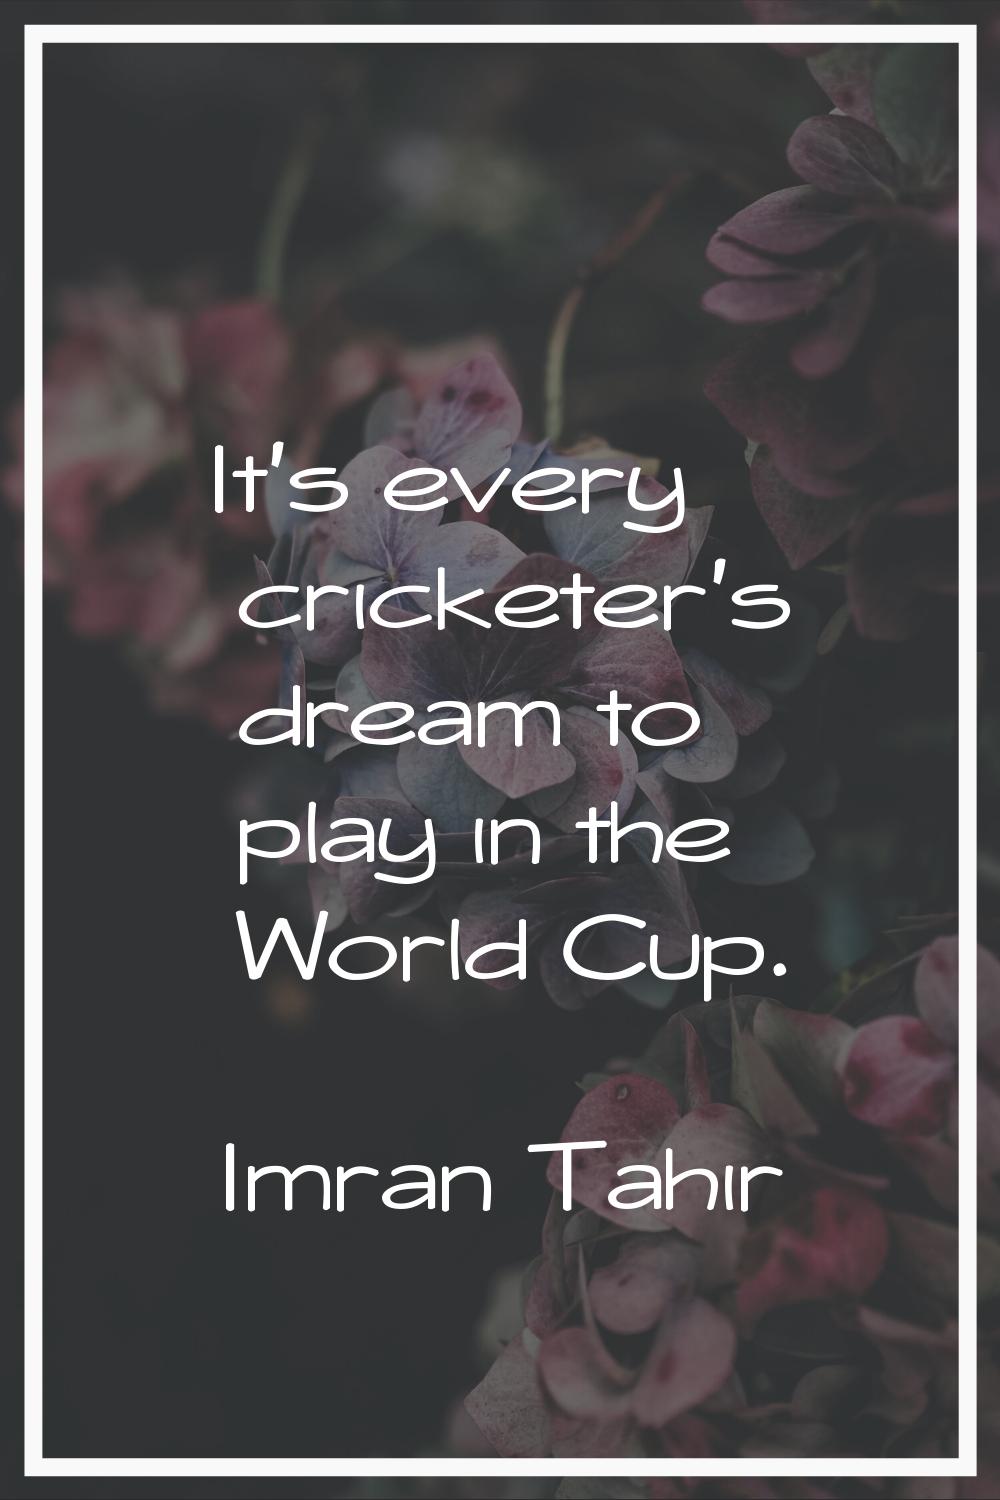 It's every cricketer's dream to play in the World Cup.